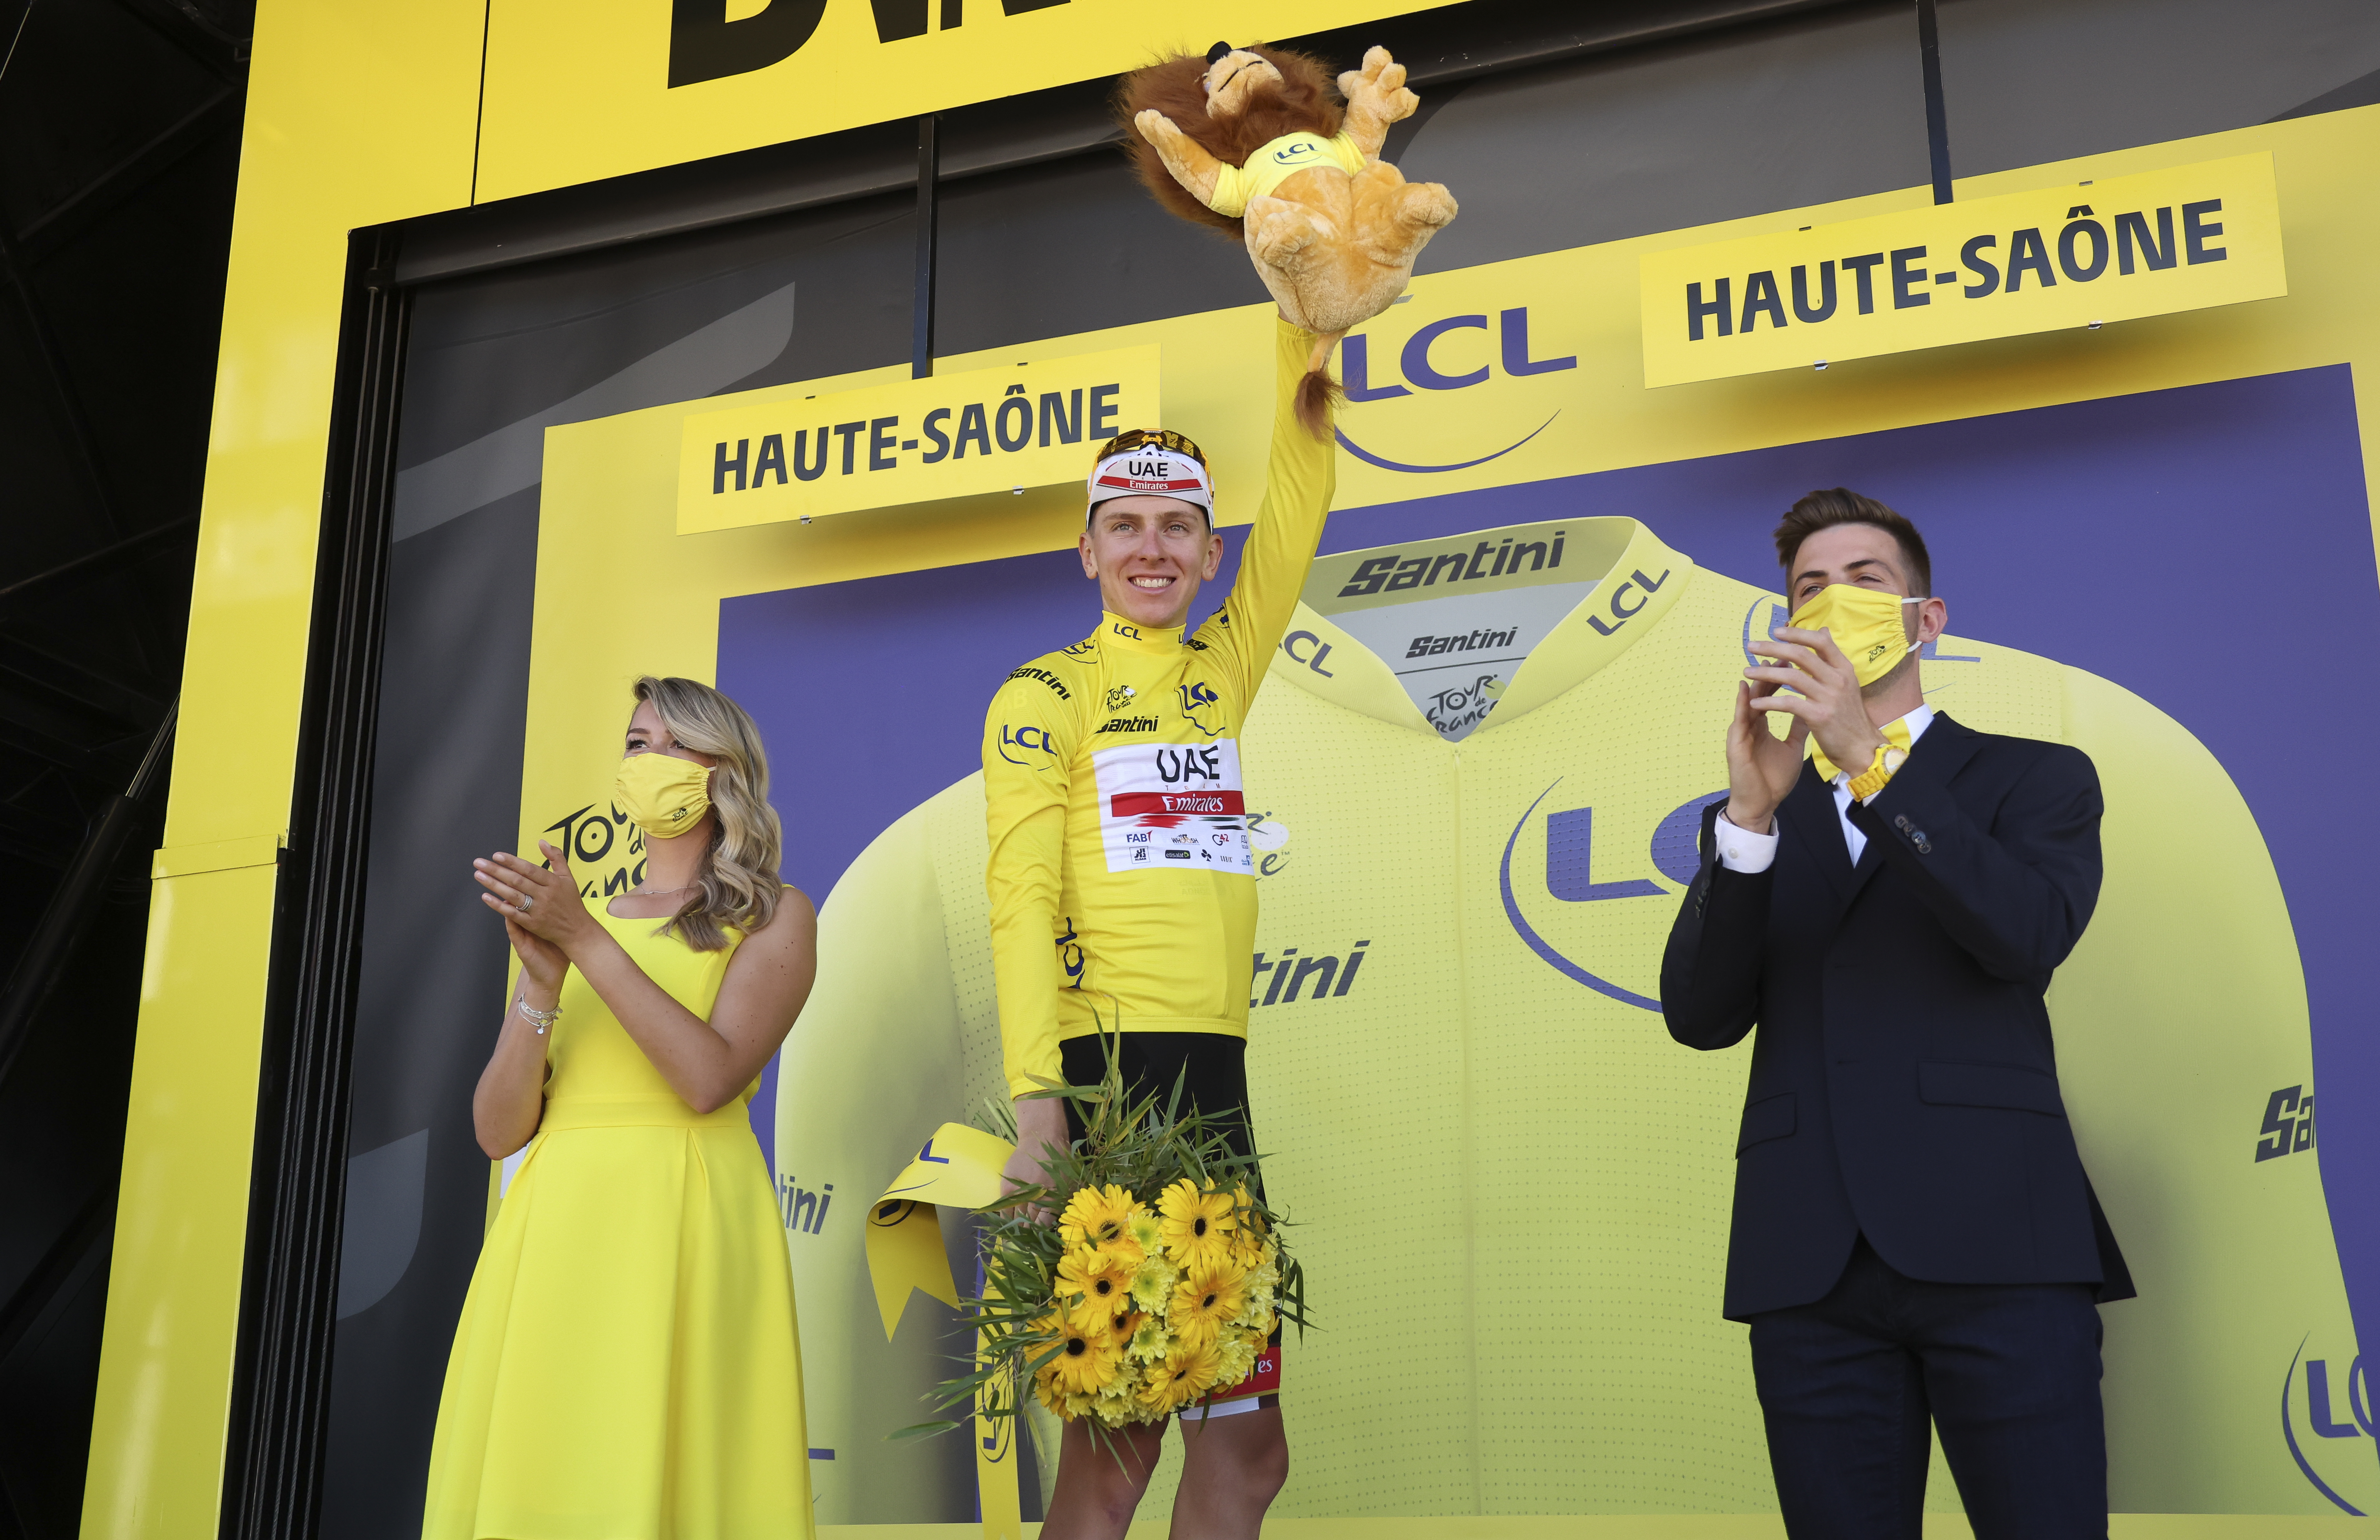 Race leader Tadej Pogacar of Slovenia and UAE Team Emirates retains the yellow jersey during the podium ceremony of the 109th Tour de France 2022, Stage 7 a 176,3 km stage from Tomblaine to La Super Planche des Belles Filles / #TDF2022 / #WorldTour / on July 8, 2022 in Planche des Belles Filles, France.